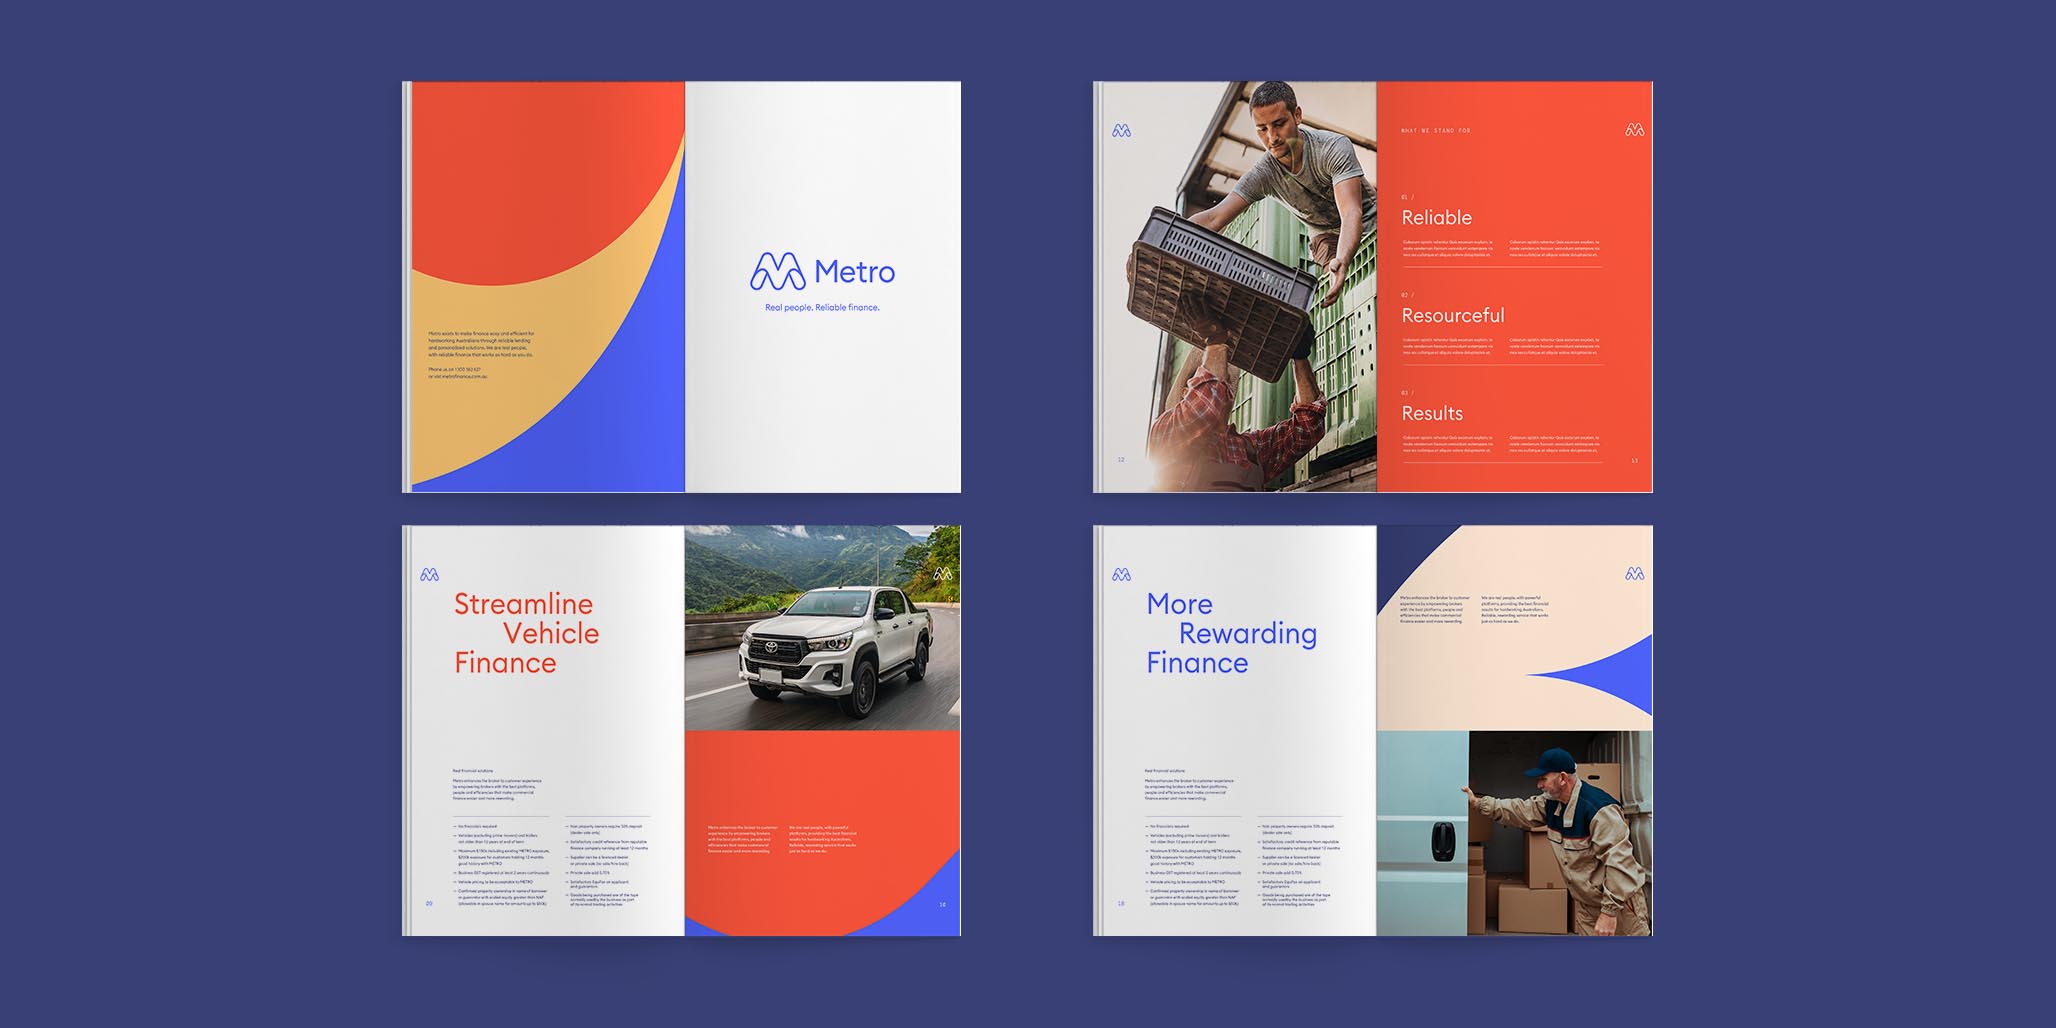 Brand positioning and rebrand project for Metro Finance's new brand identity, Image H